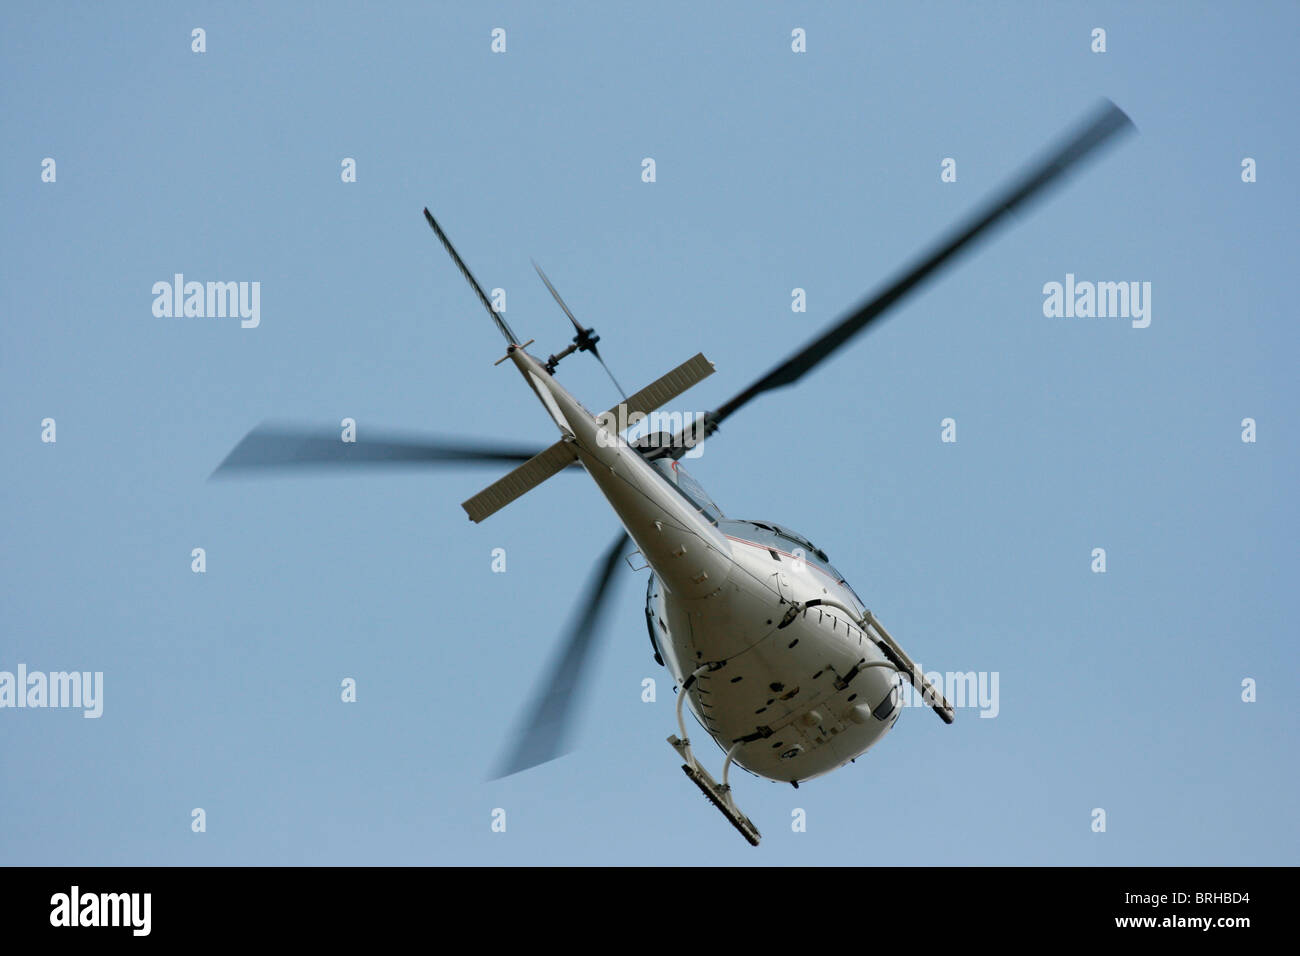 A Eurocopter AS350-B2 (Ecureuil/Squirrel) in flight seen from the rear. Stock Photo